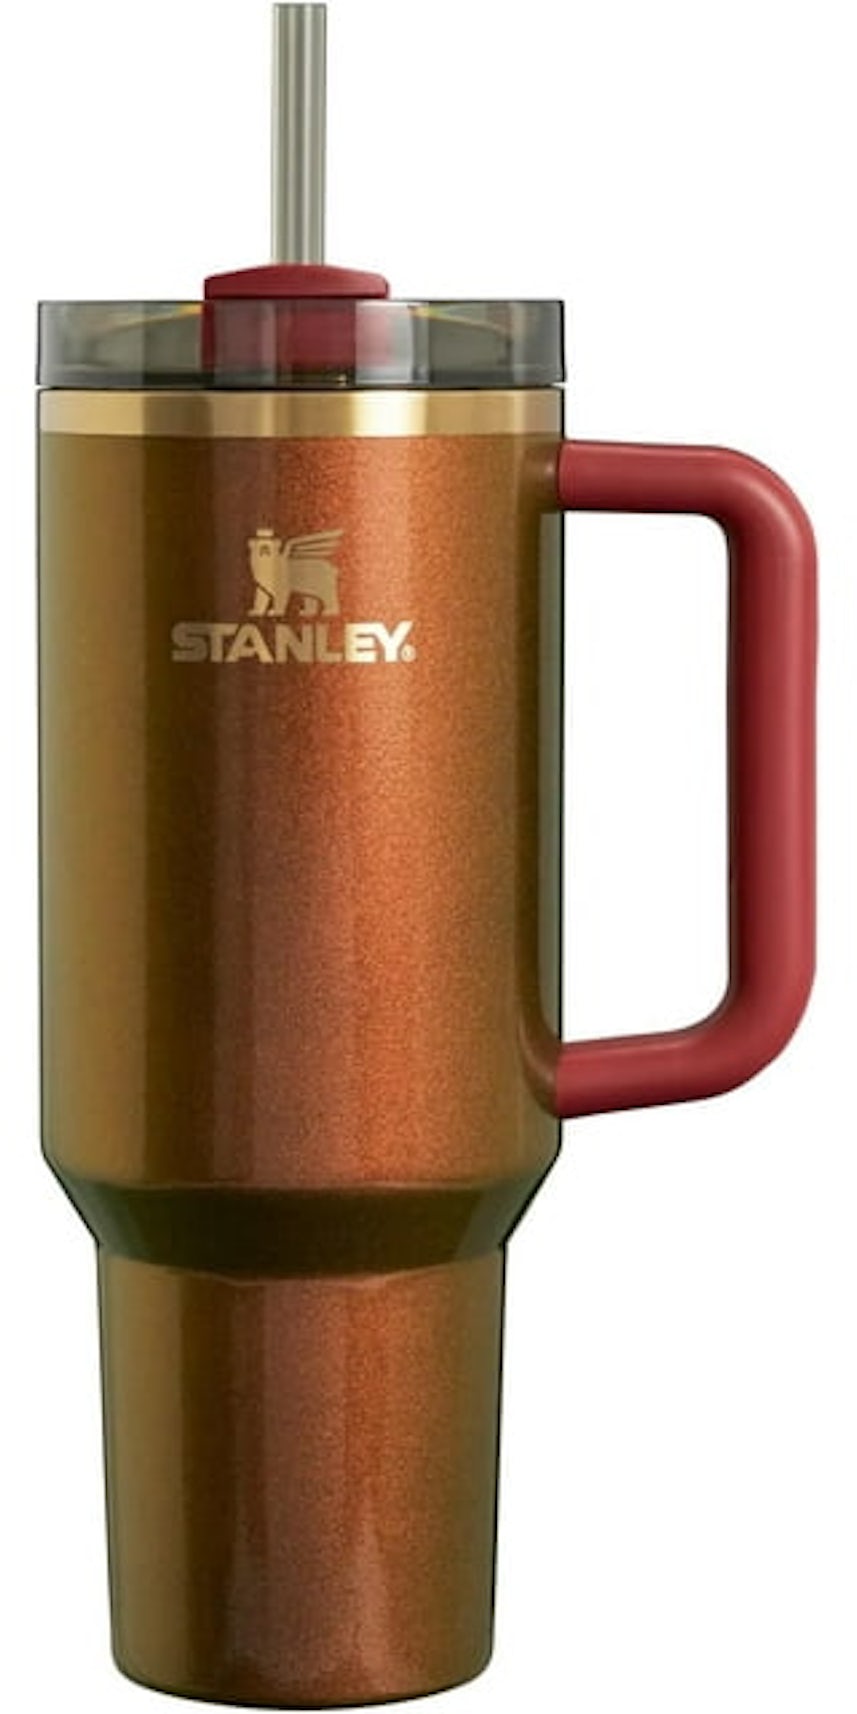 Limited edition Stanley + accessories